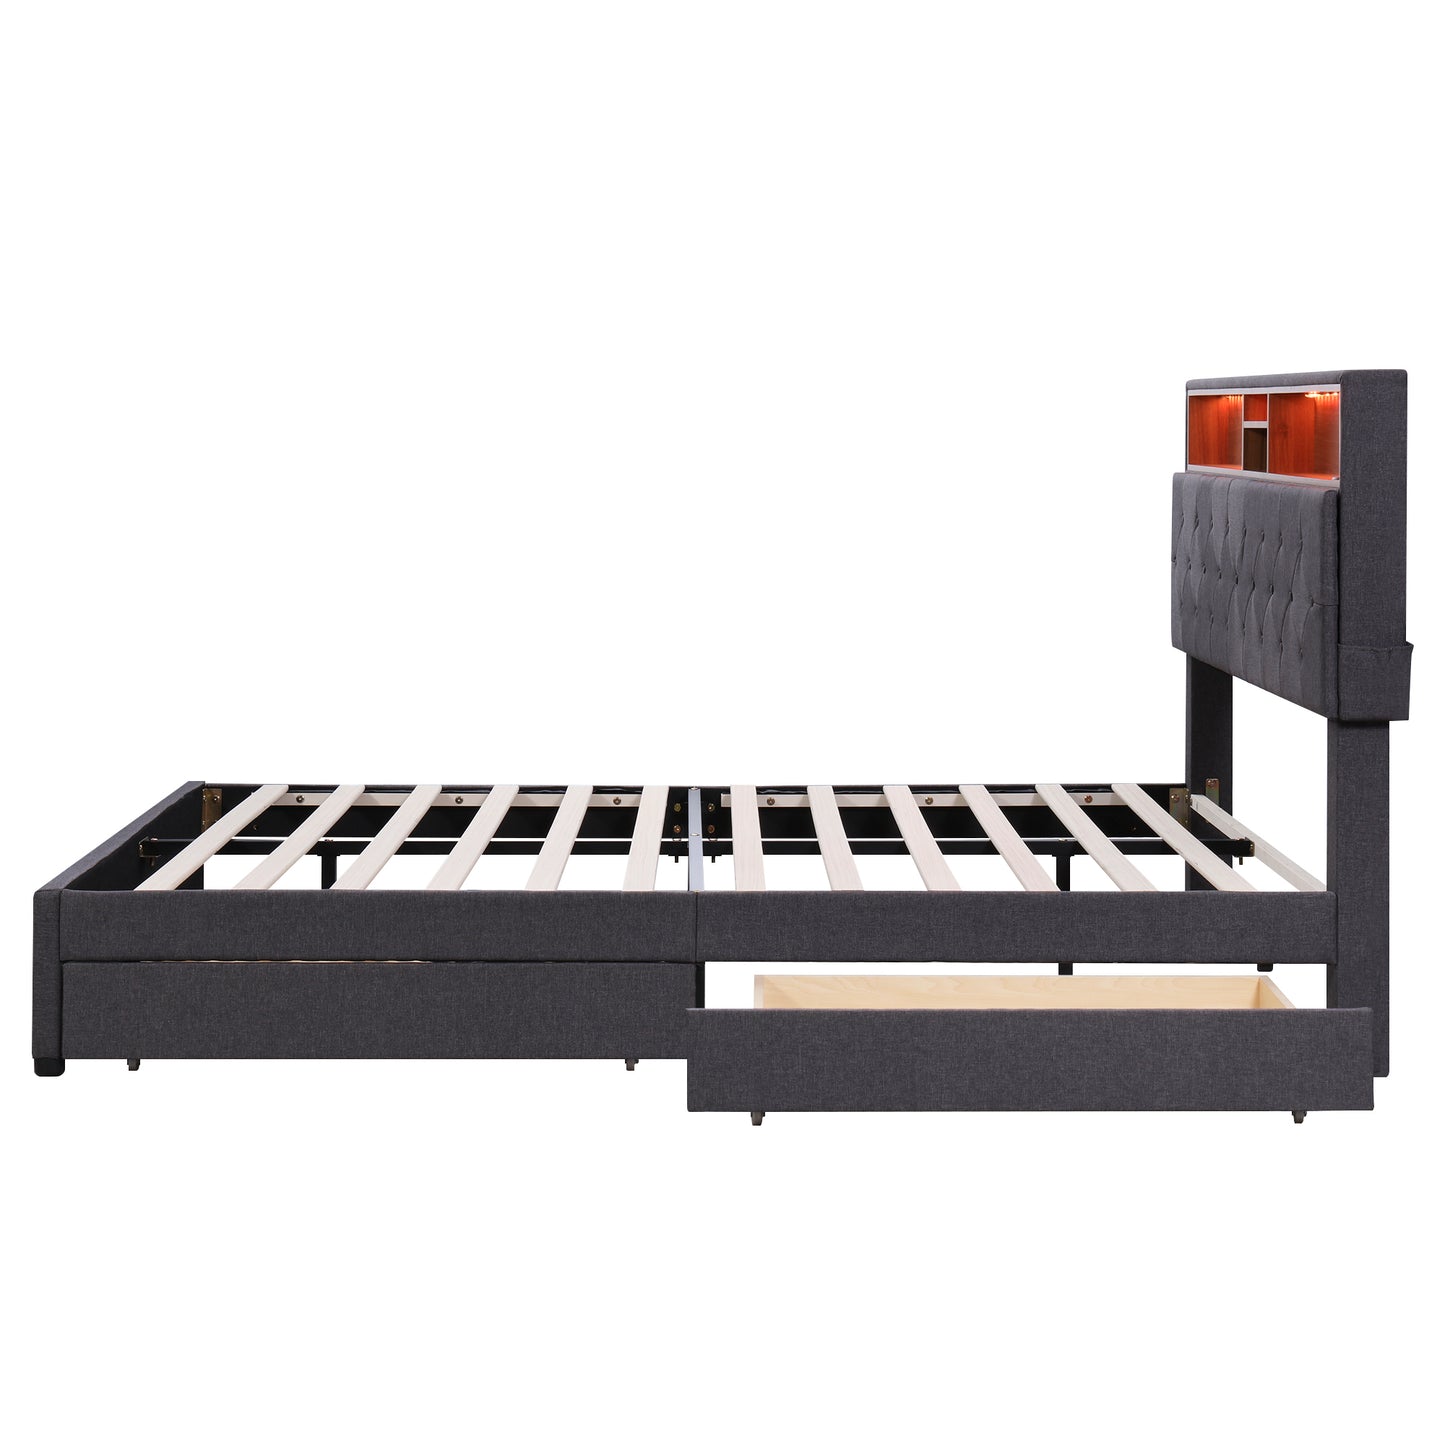 Queen Size Upholstered Platform Bed with Storage Headboard, LED, USB Charging and 2 Drawers, Dark Gray